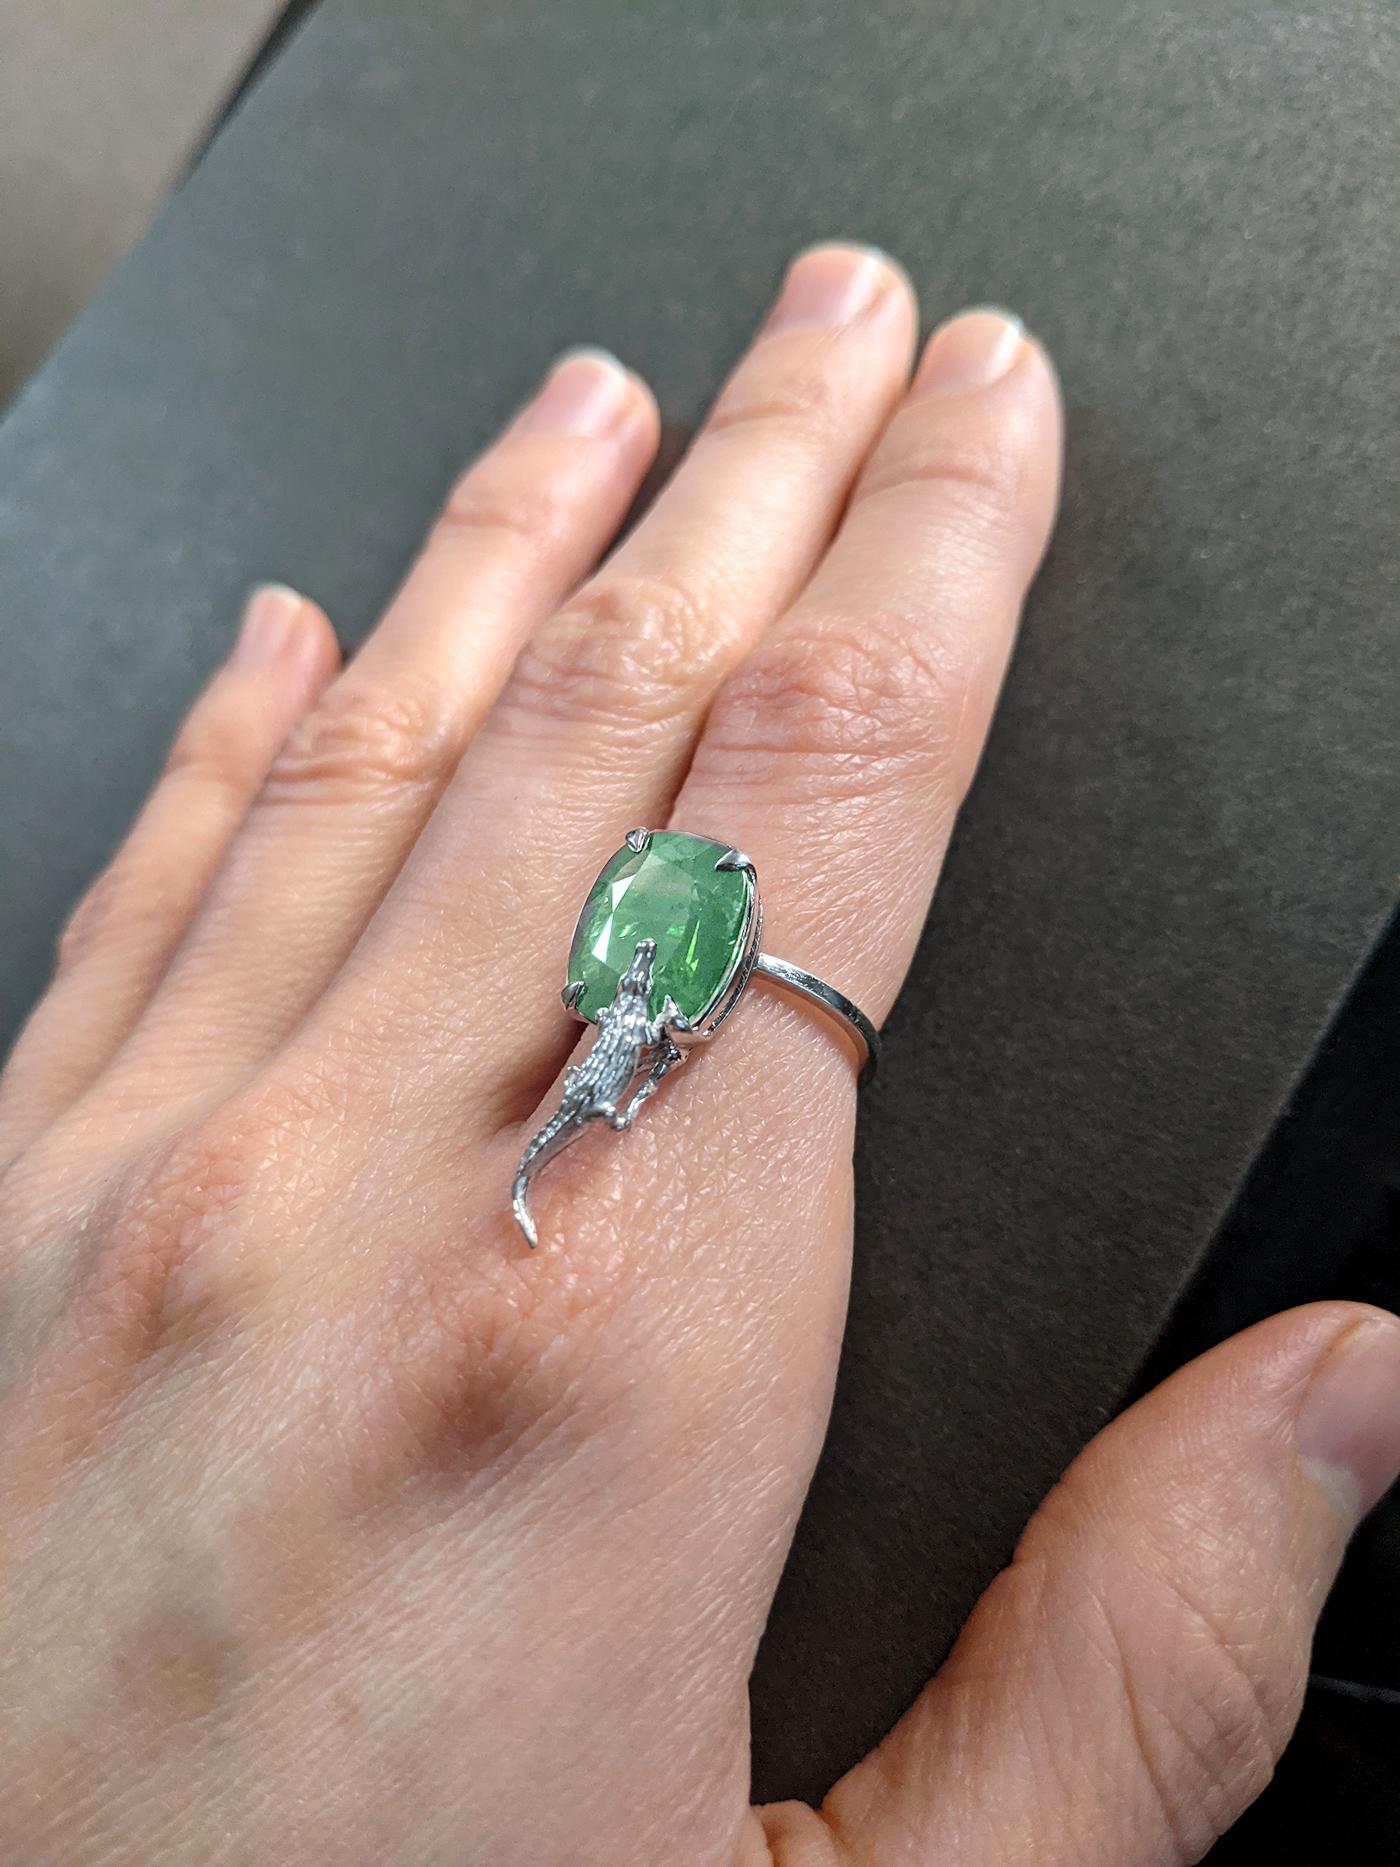 This 18 karat white gold Mesopotamian contemporary fashion ring is encrusted with 3.48 carats natural cushion cut emerald, cold tone, 10.5x9 mm. 

You can order this piece in white, rose or yellow gold, with spinel, sapphire, emerald, tourmaline or